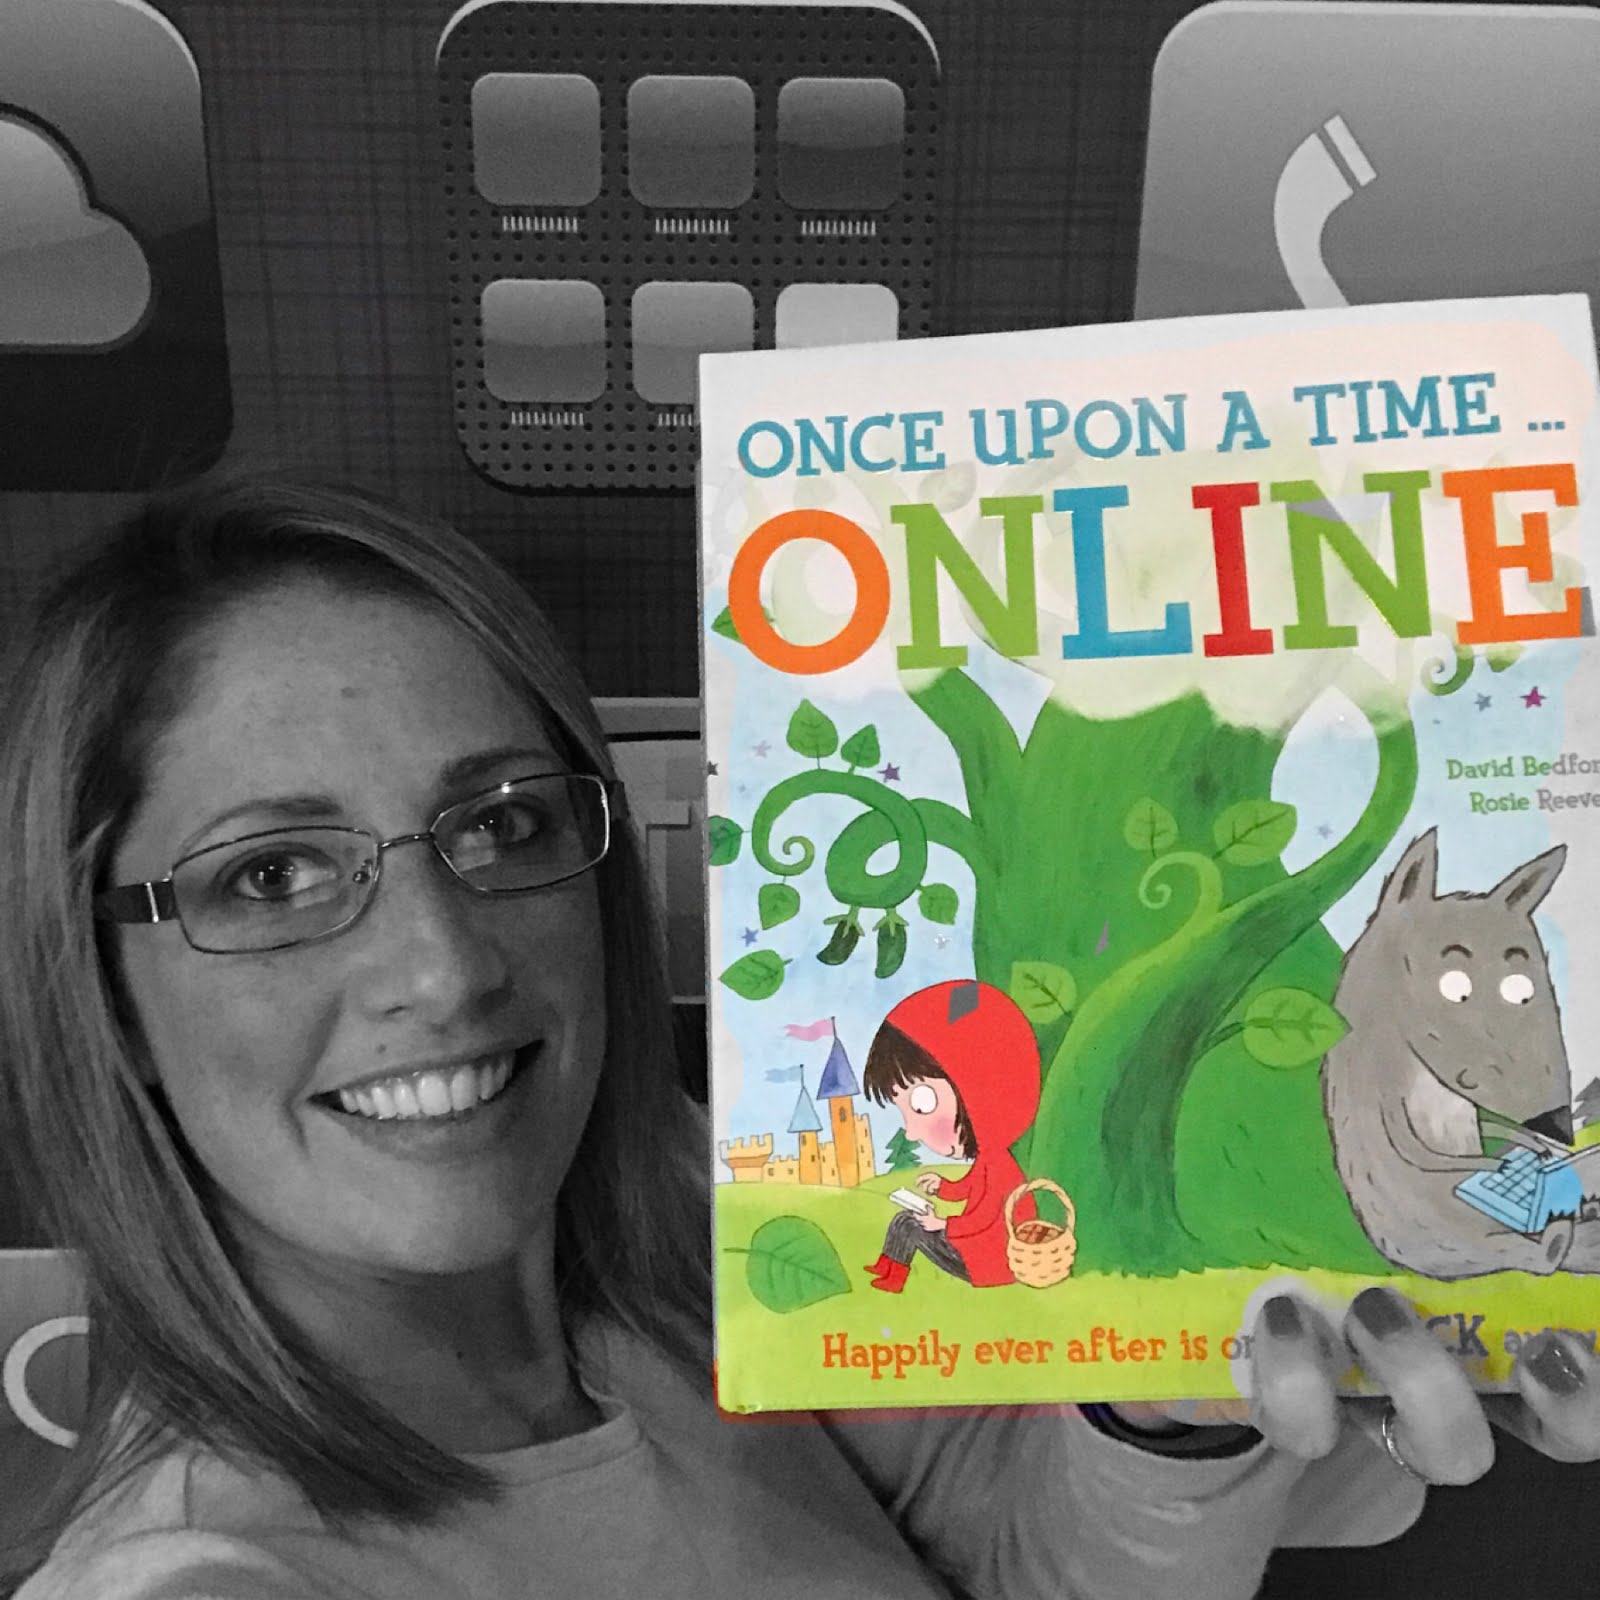 Incorporate fairy tale elements with technology in the classroom with these before, during and after reading activities that you can use with the children's book, Once Upon a Time Online. An important message about digital citizenship is shared. Technology in the classroom